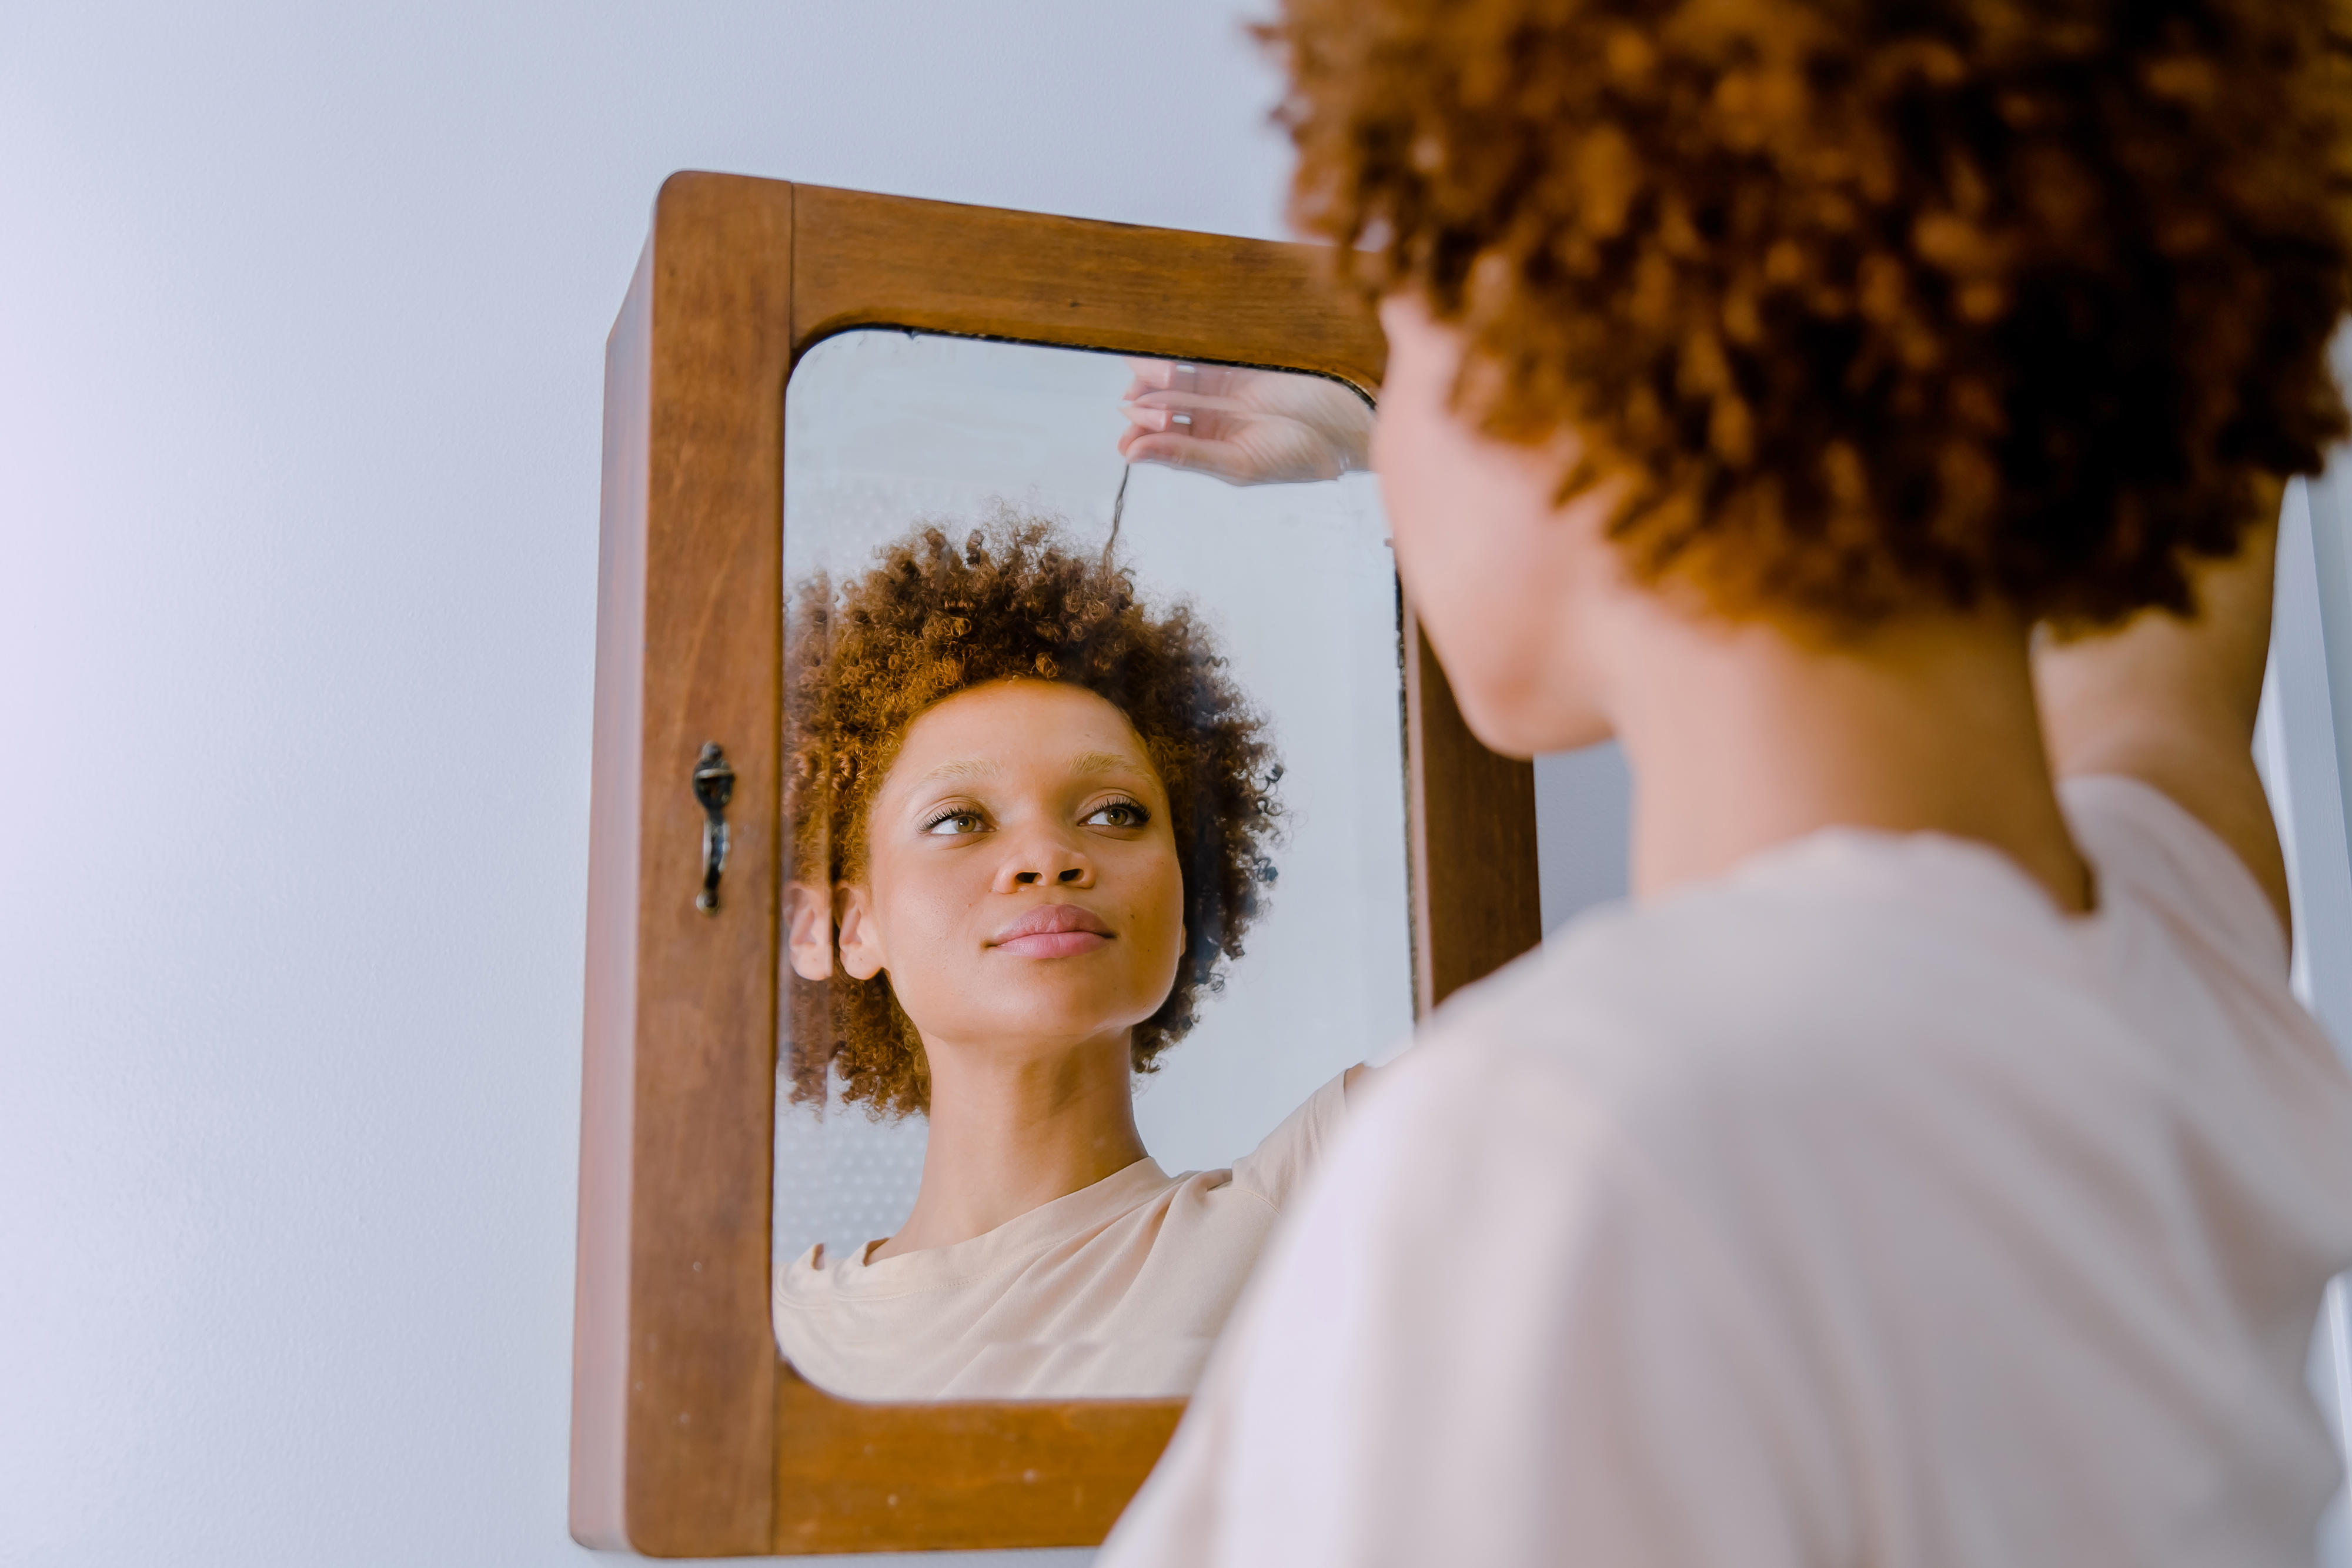 Curly haired woman staring at her reflection in the mirror examining her hair while pulling on one of her strands